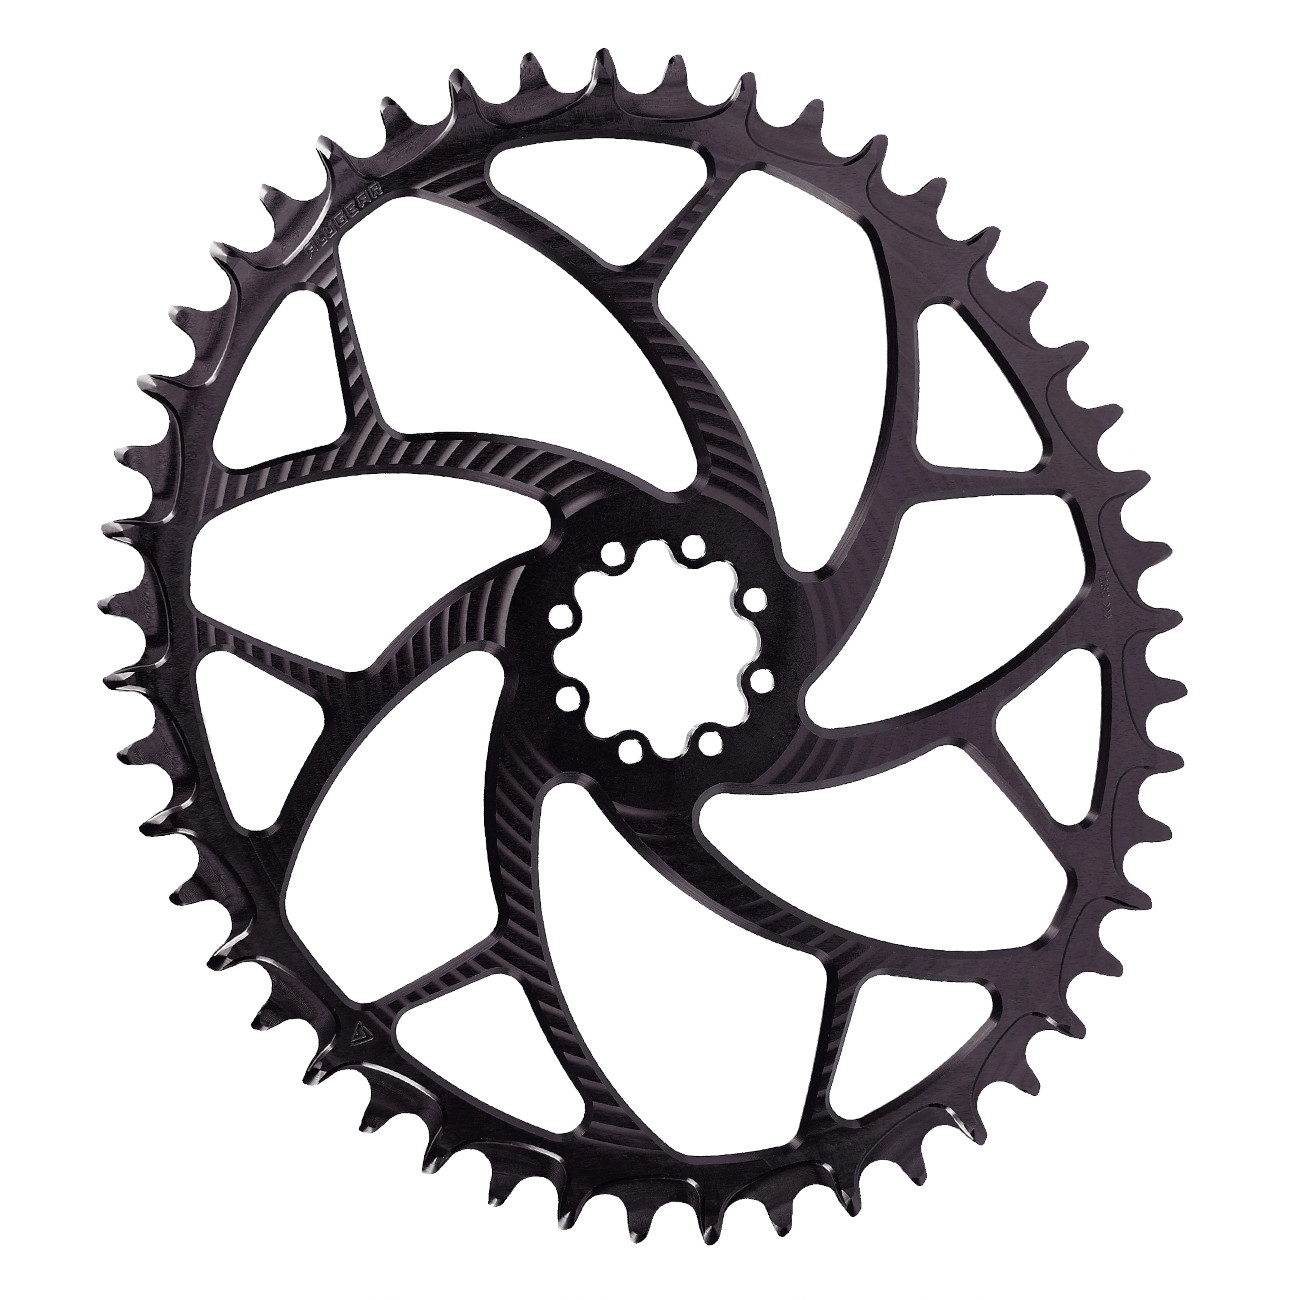 Image of Alugear ELM Narrow Wide Road / Gravel Chainring - Oval - for 1x SRAM 8-Bolt Direct Mount